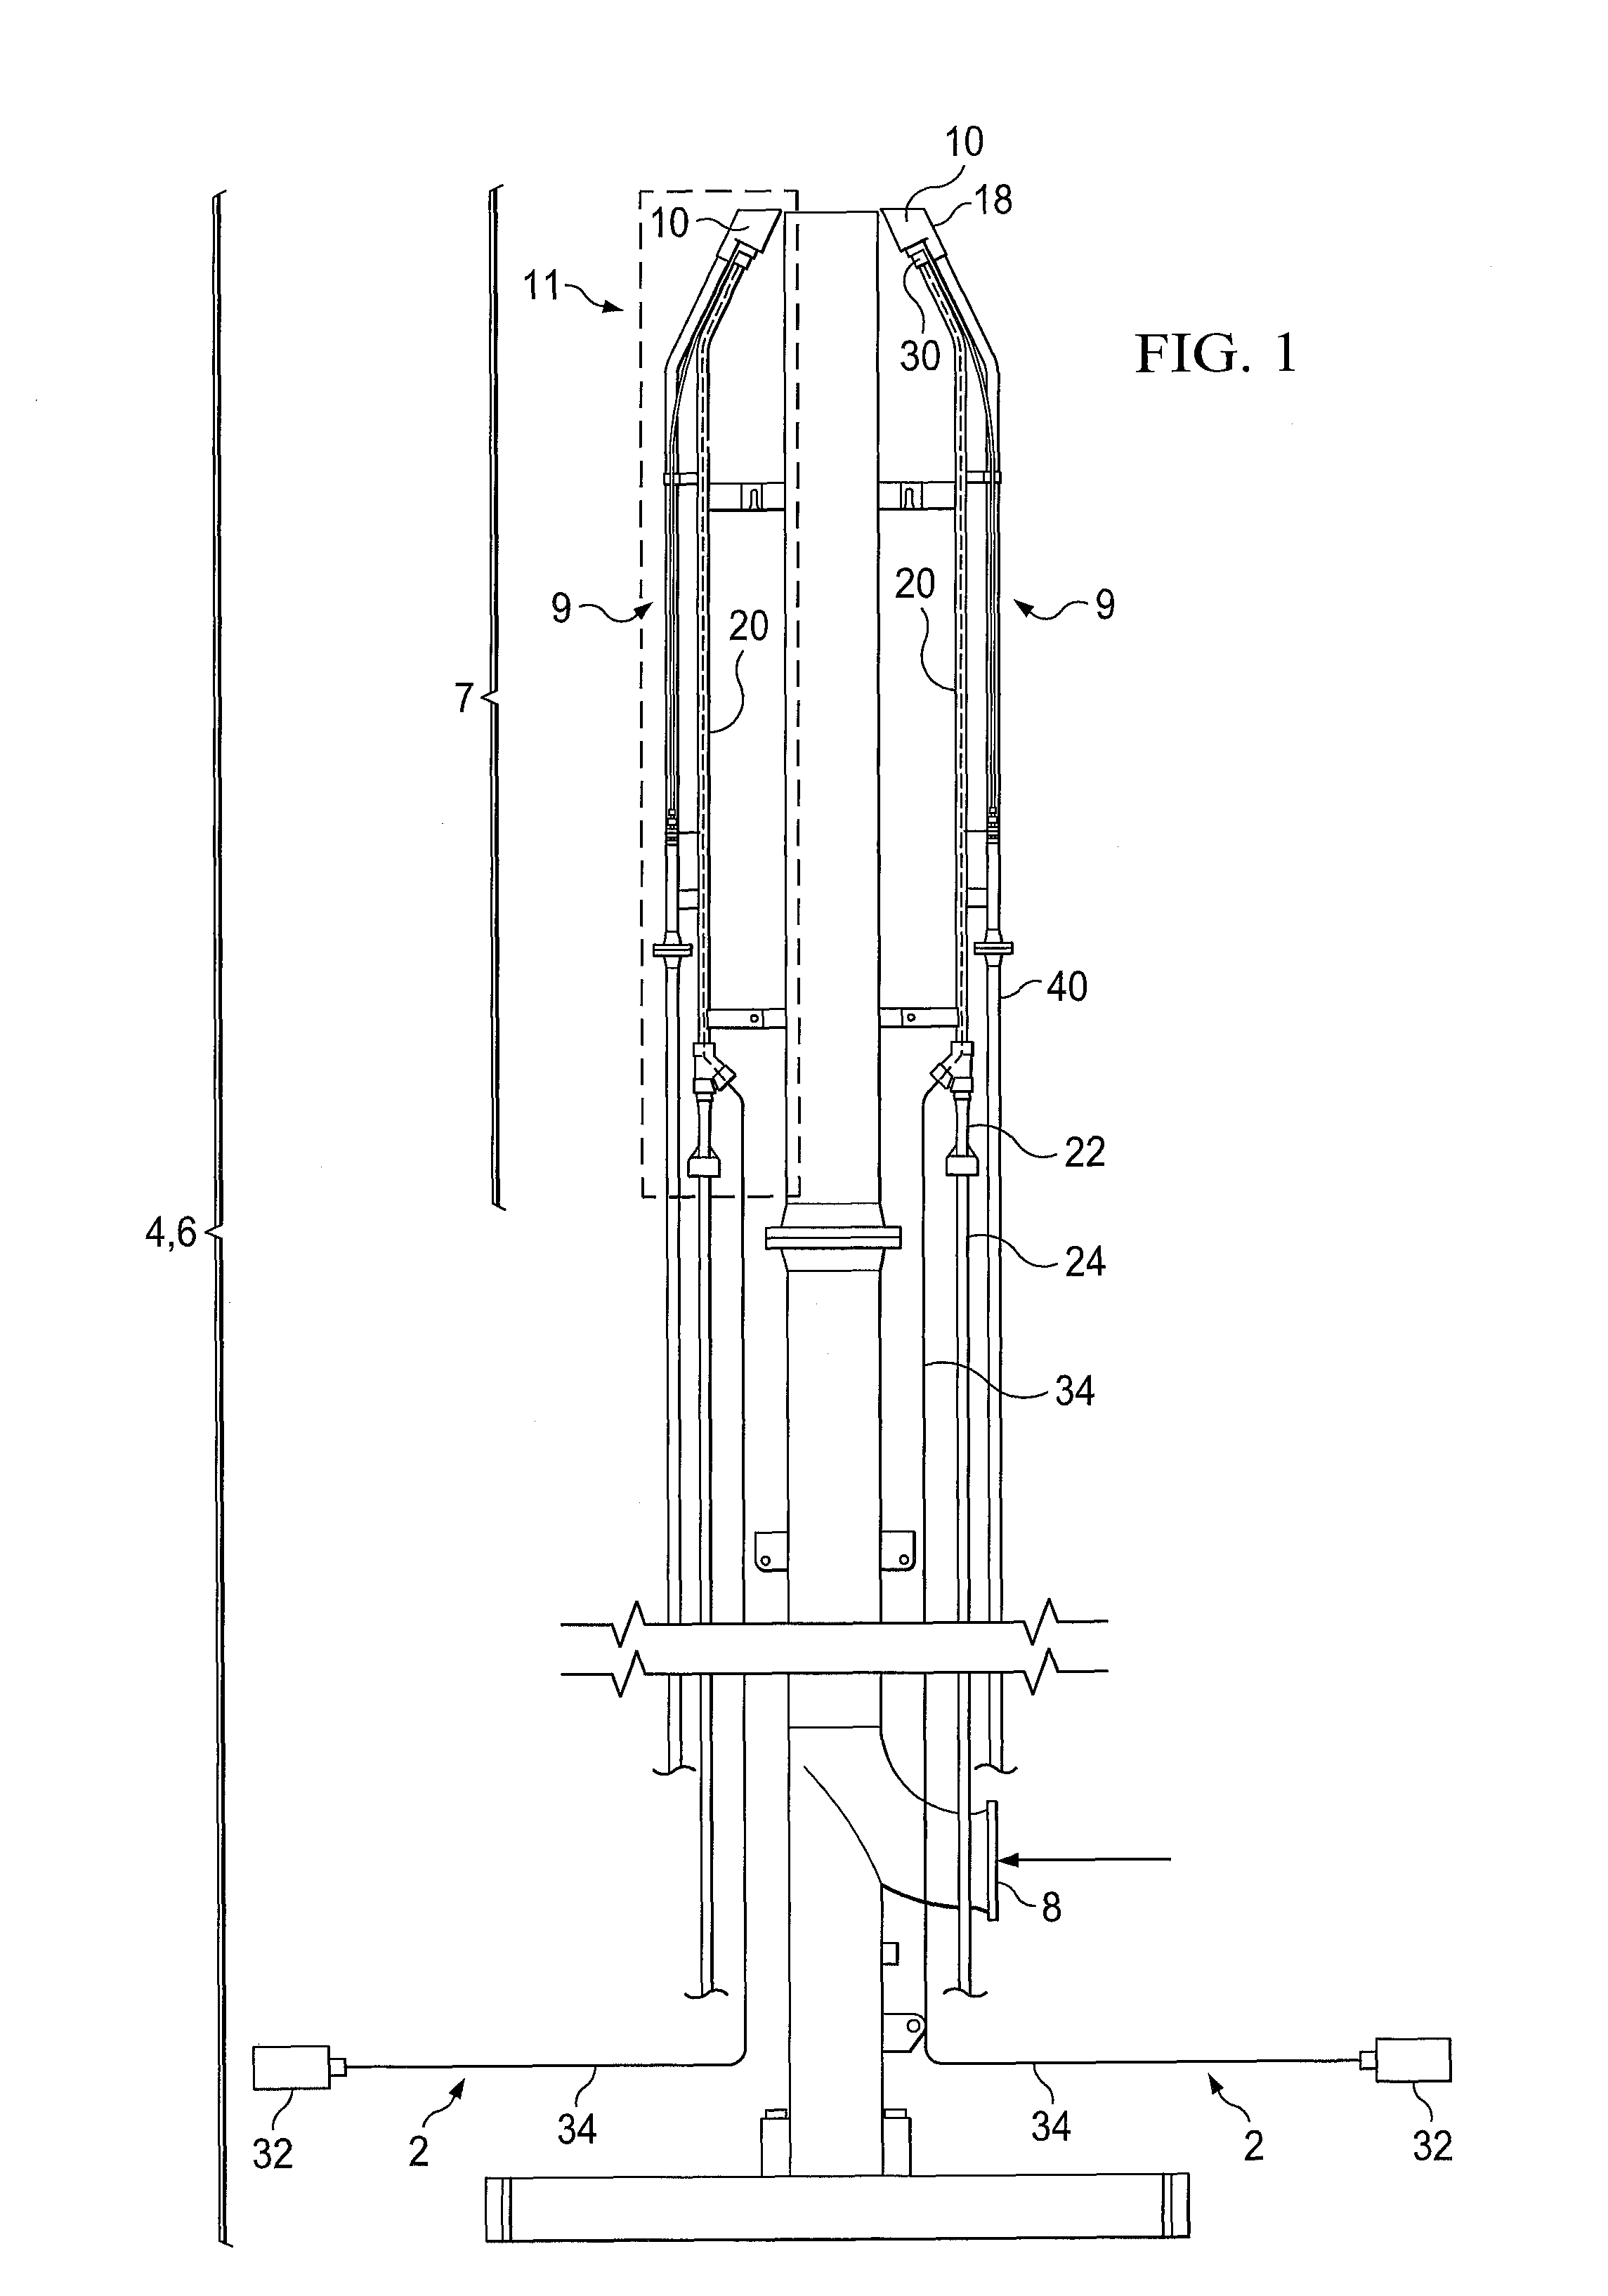 Apparatus and method for monitoring flares and flare pilots